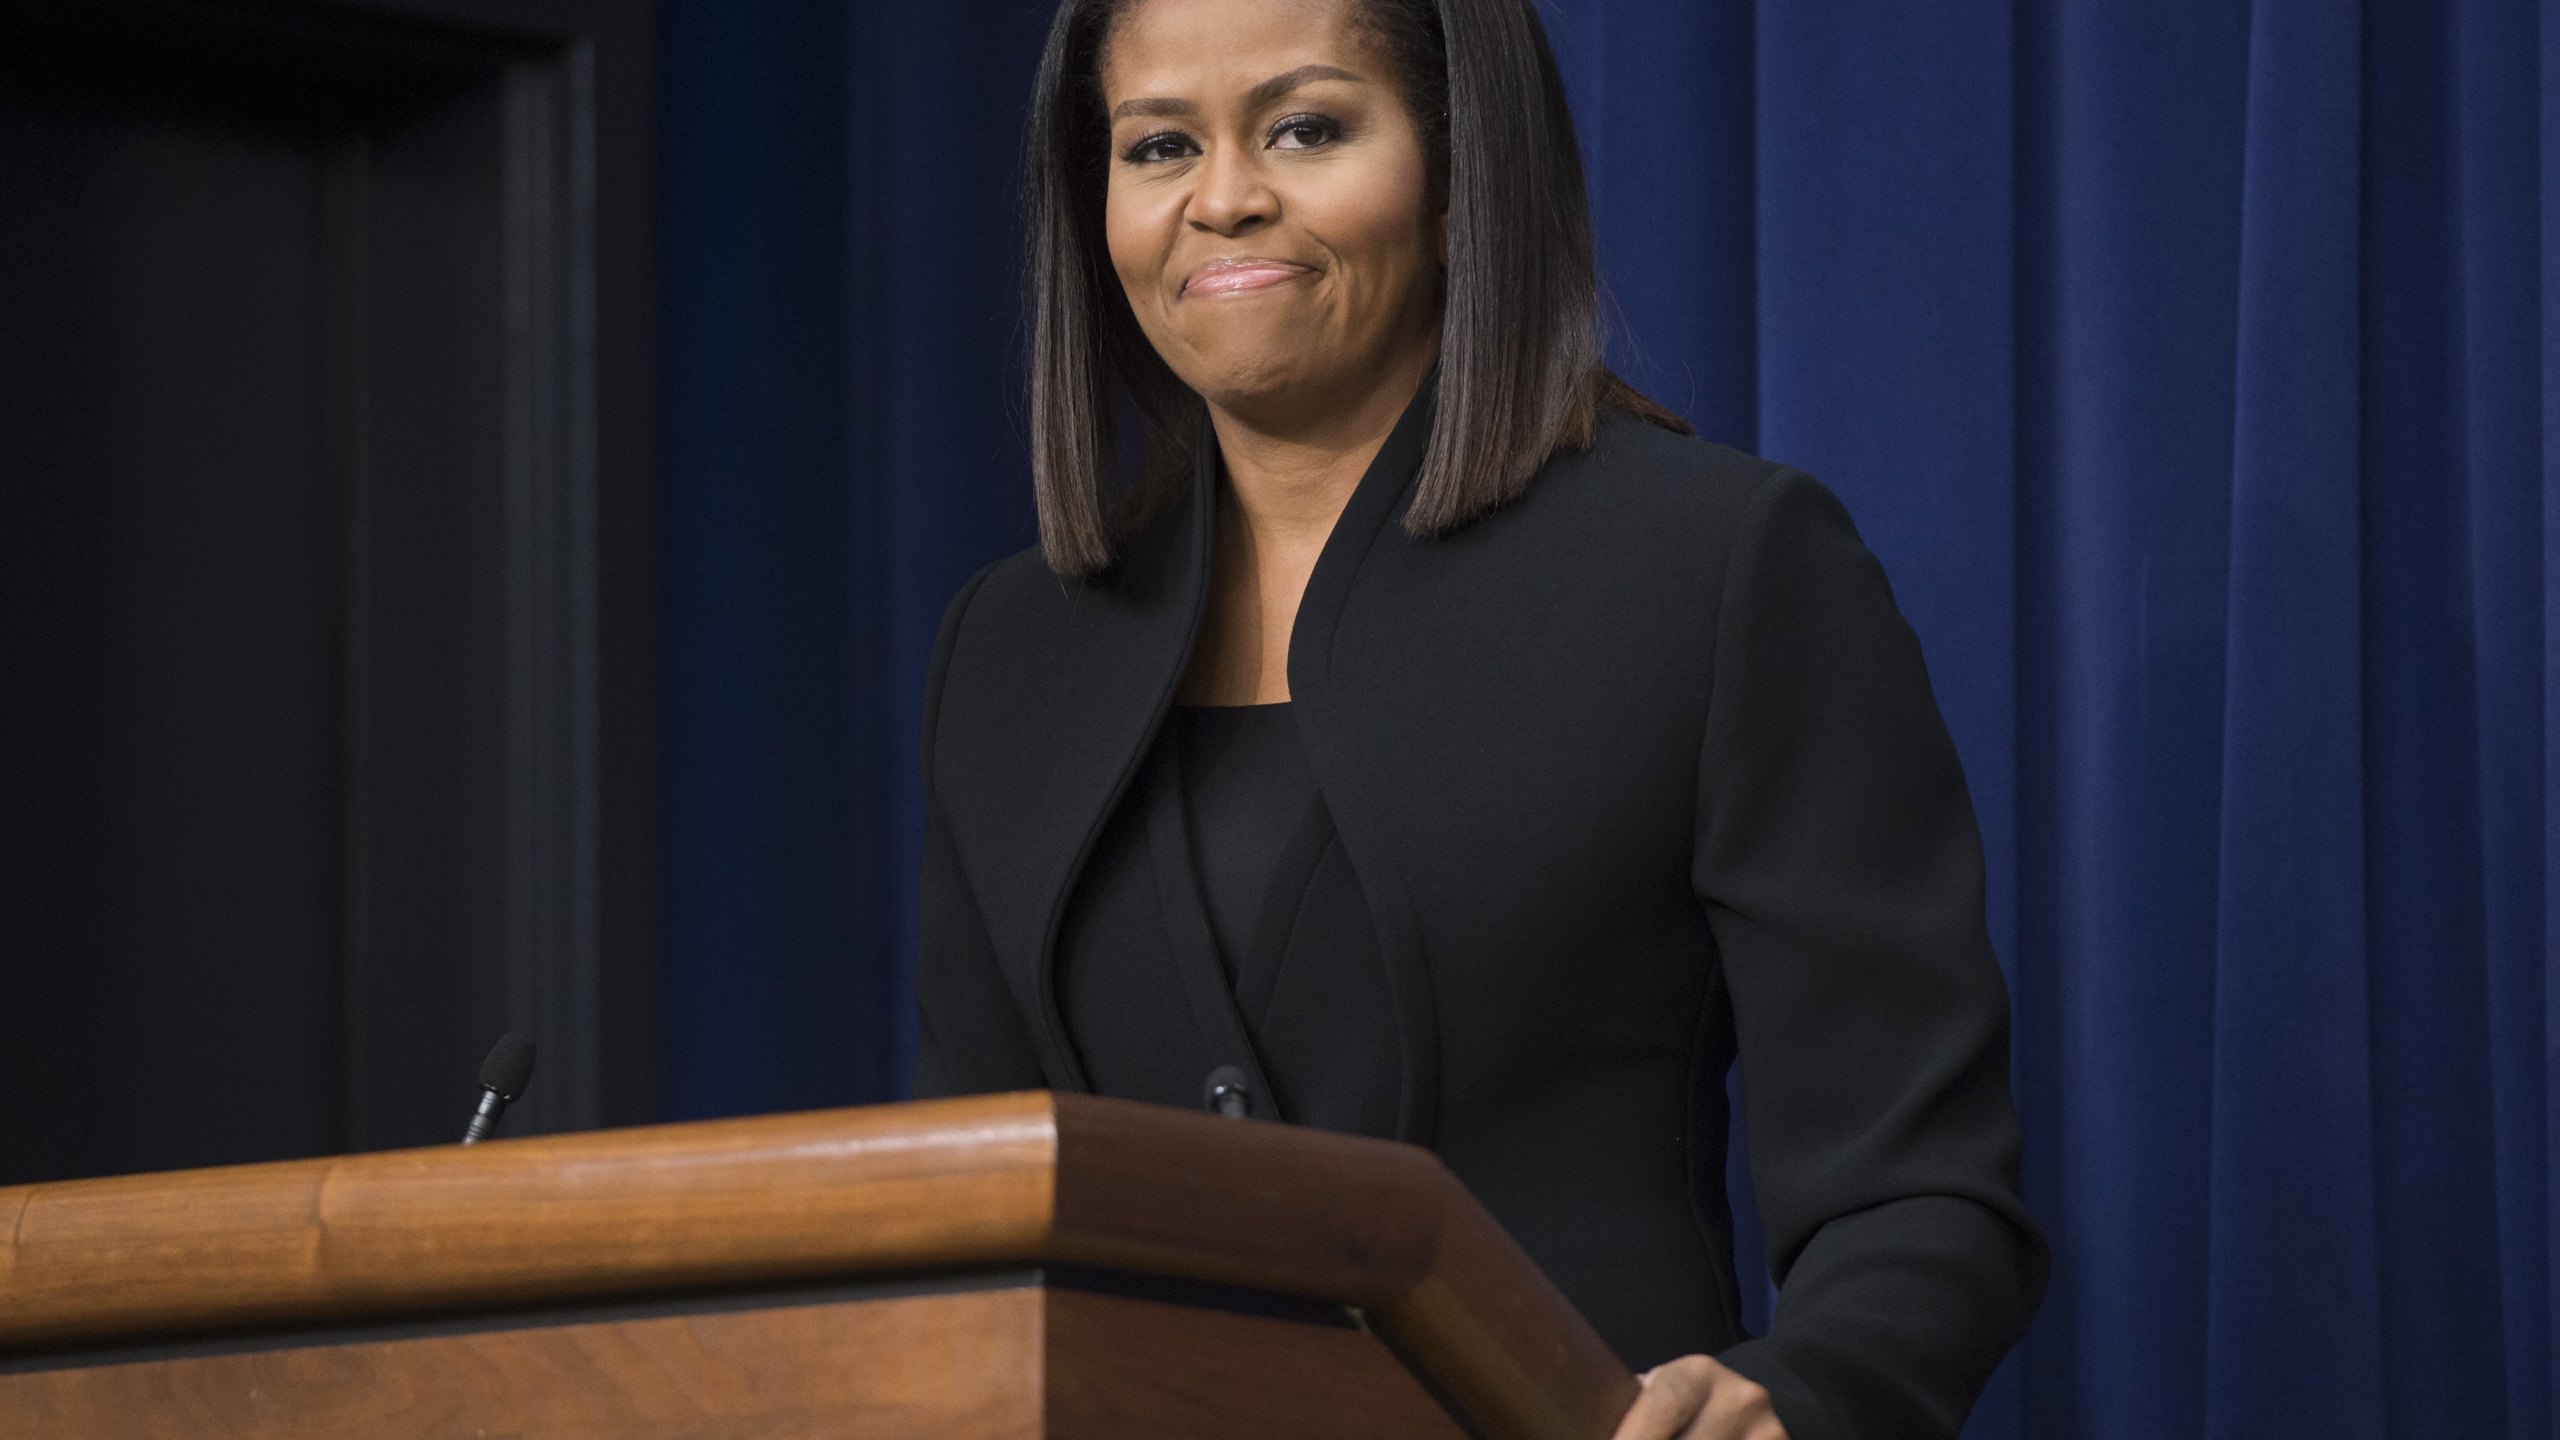 US First Lady Michelle Obama speaks following a screening of the movie, "Hidden Figures," in the Eisenhower Executive Office Building adjacent to the White House in Washington, DC, December 15, 2016.